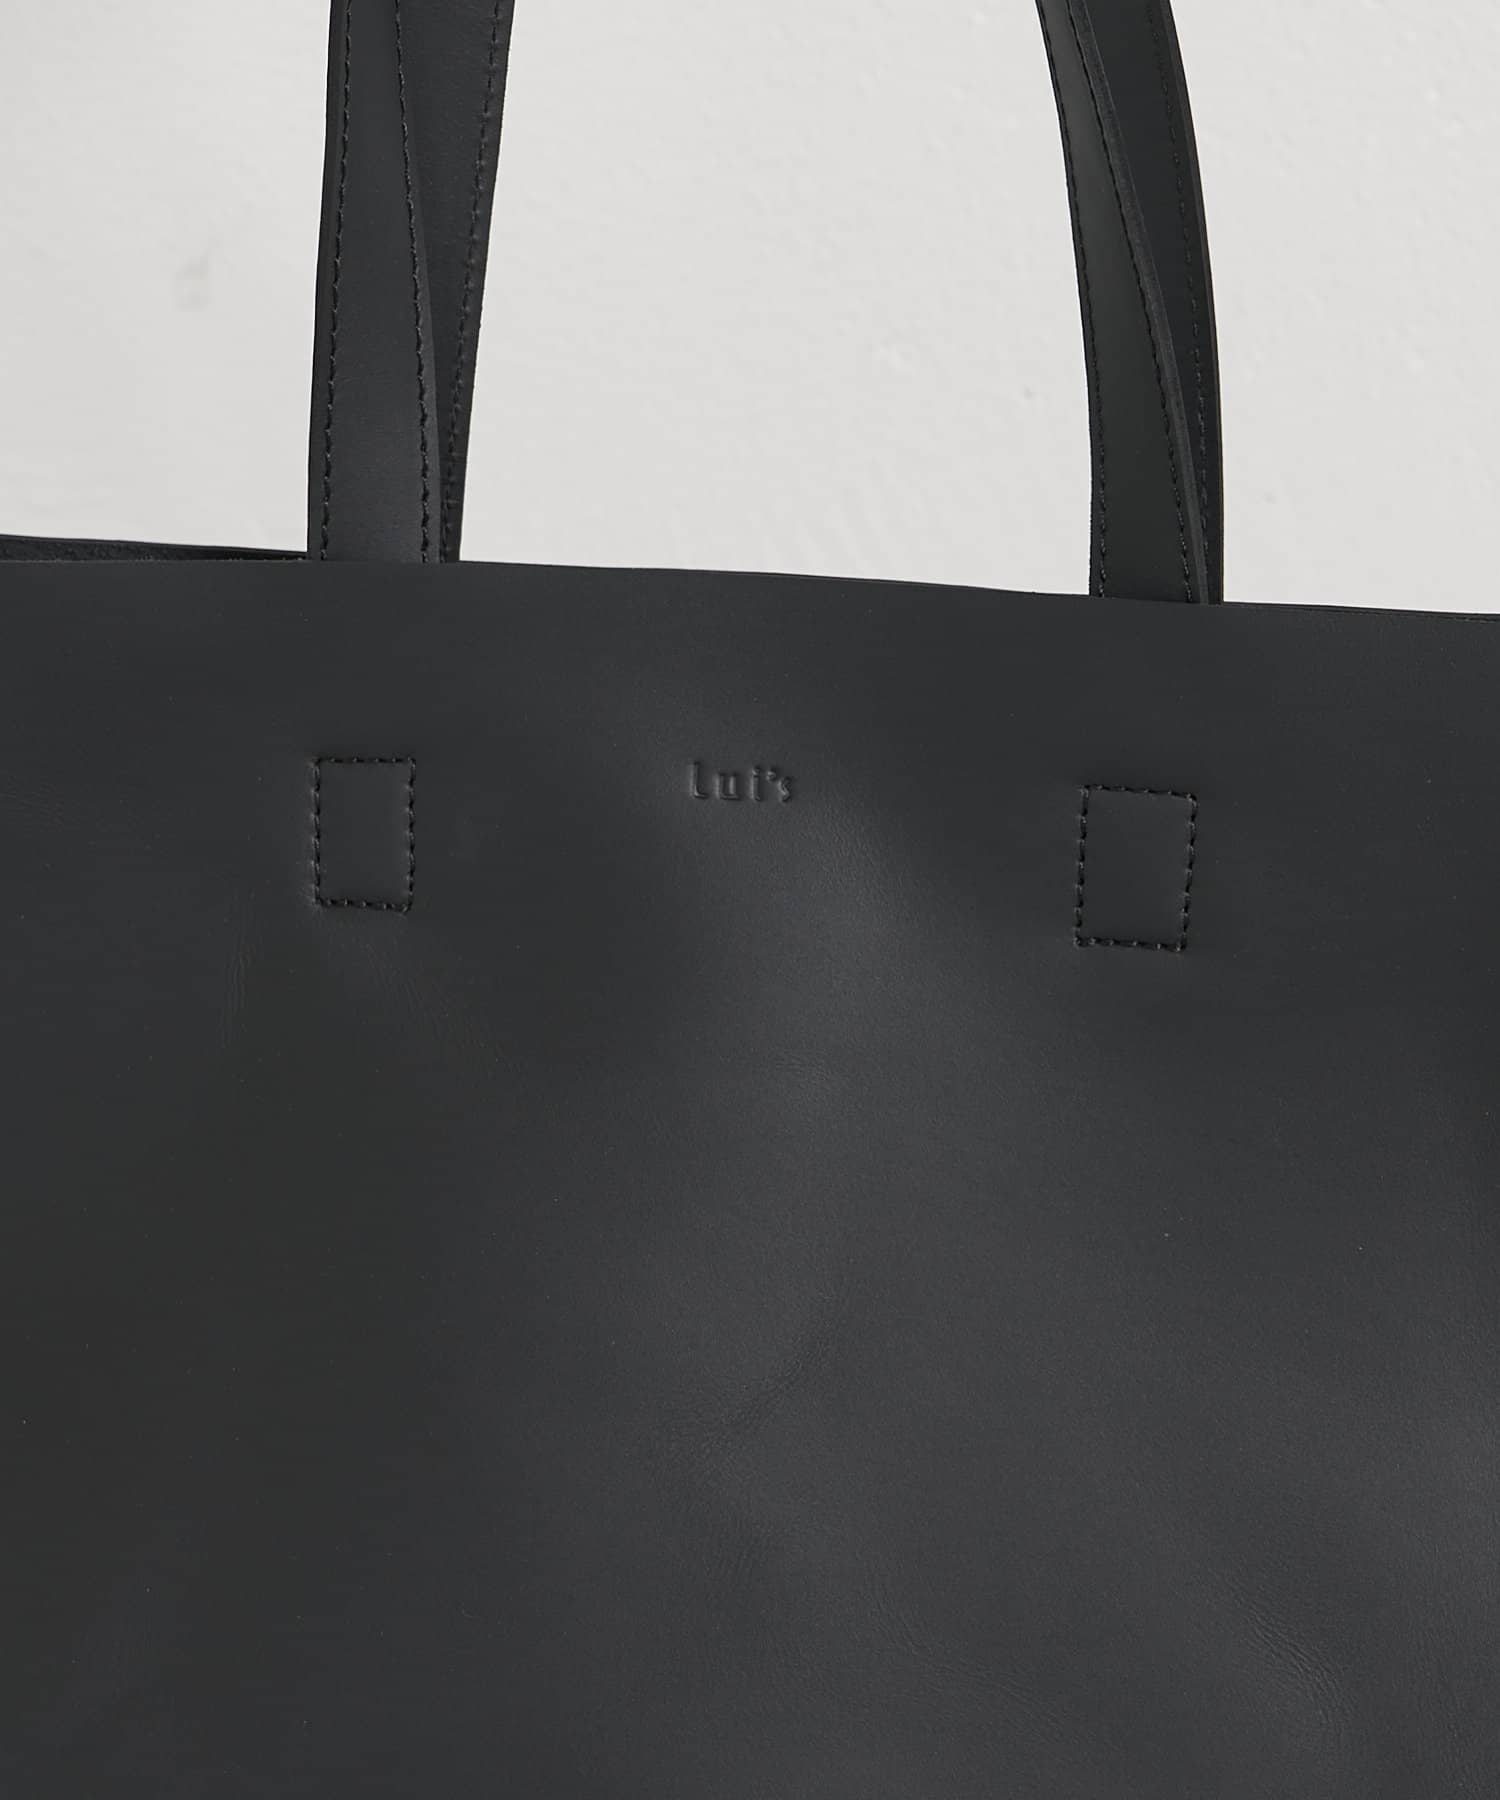 Lui's(ルイス) leather tote bag